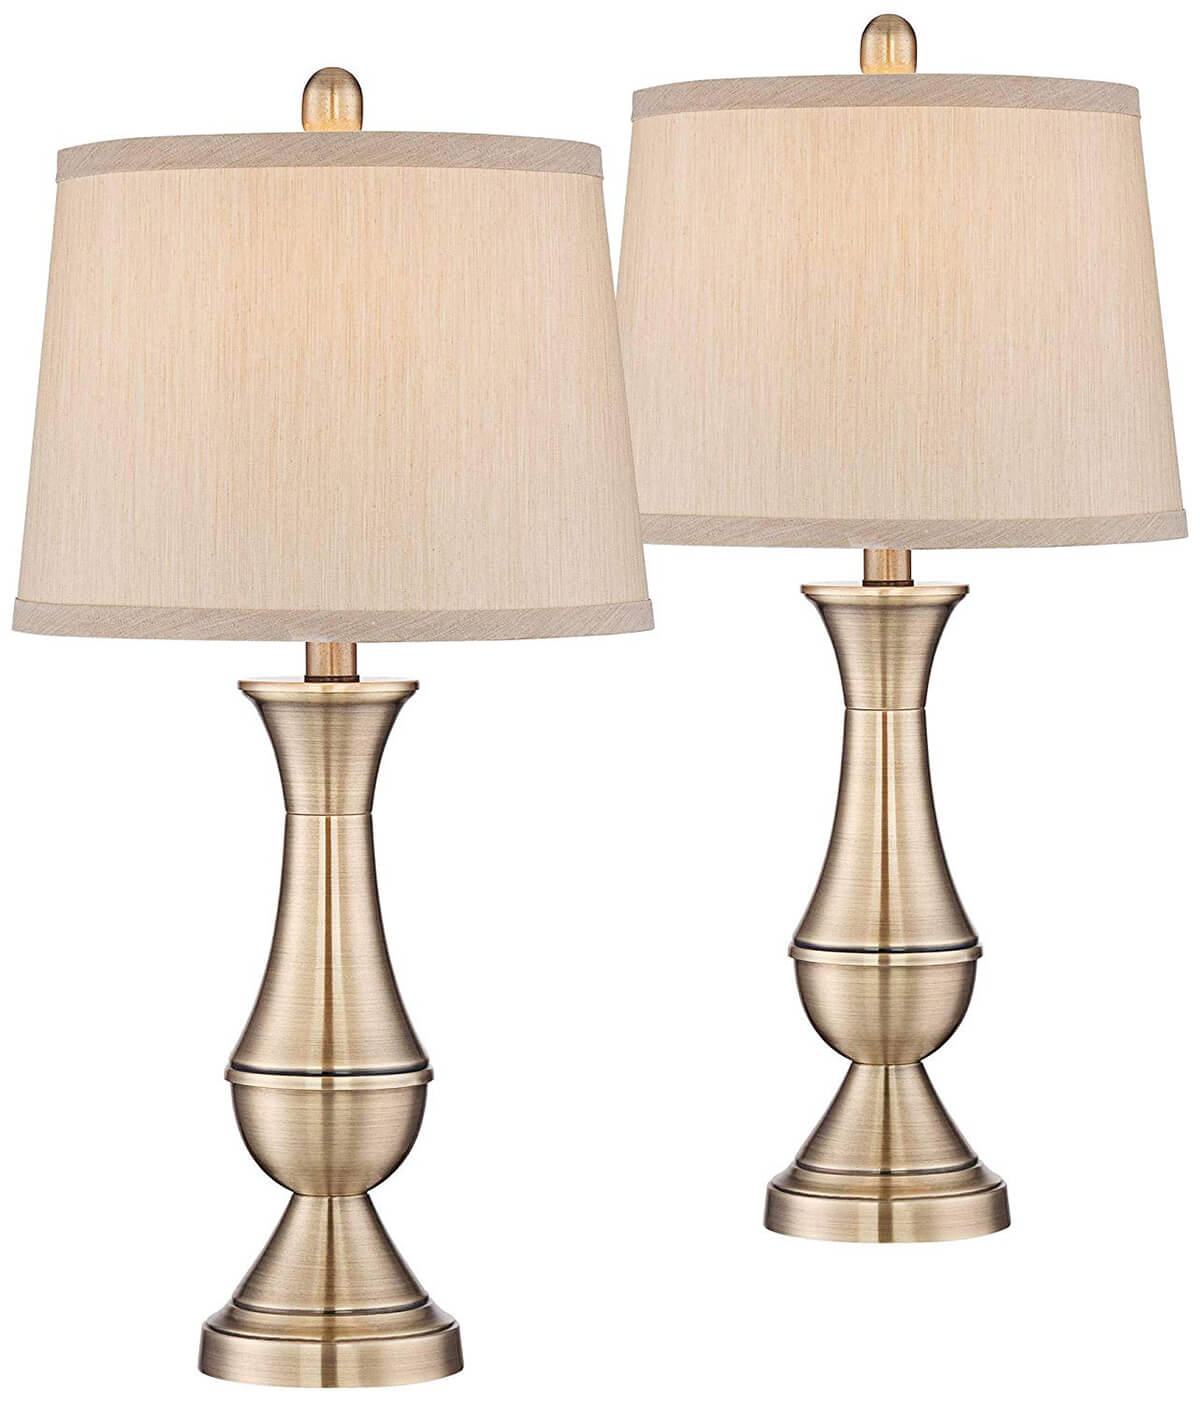 25 Best Bedside Table Lamps To Light Up, Best Bedside Table Lamps 2021